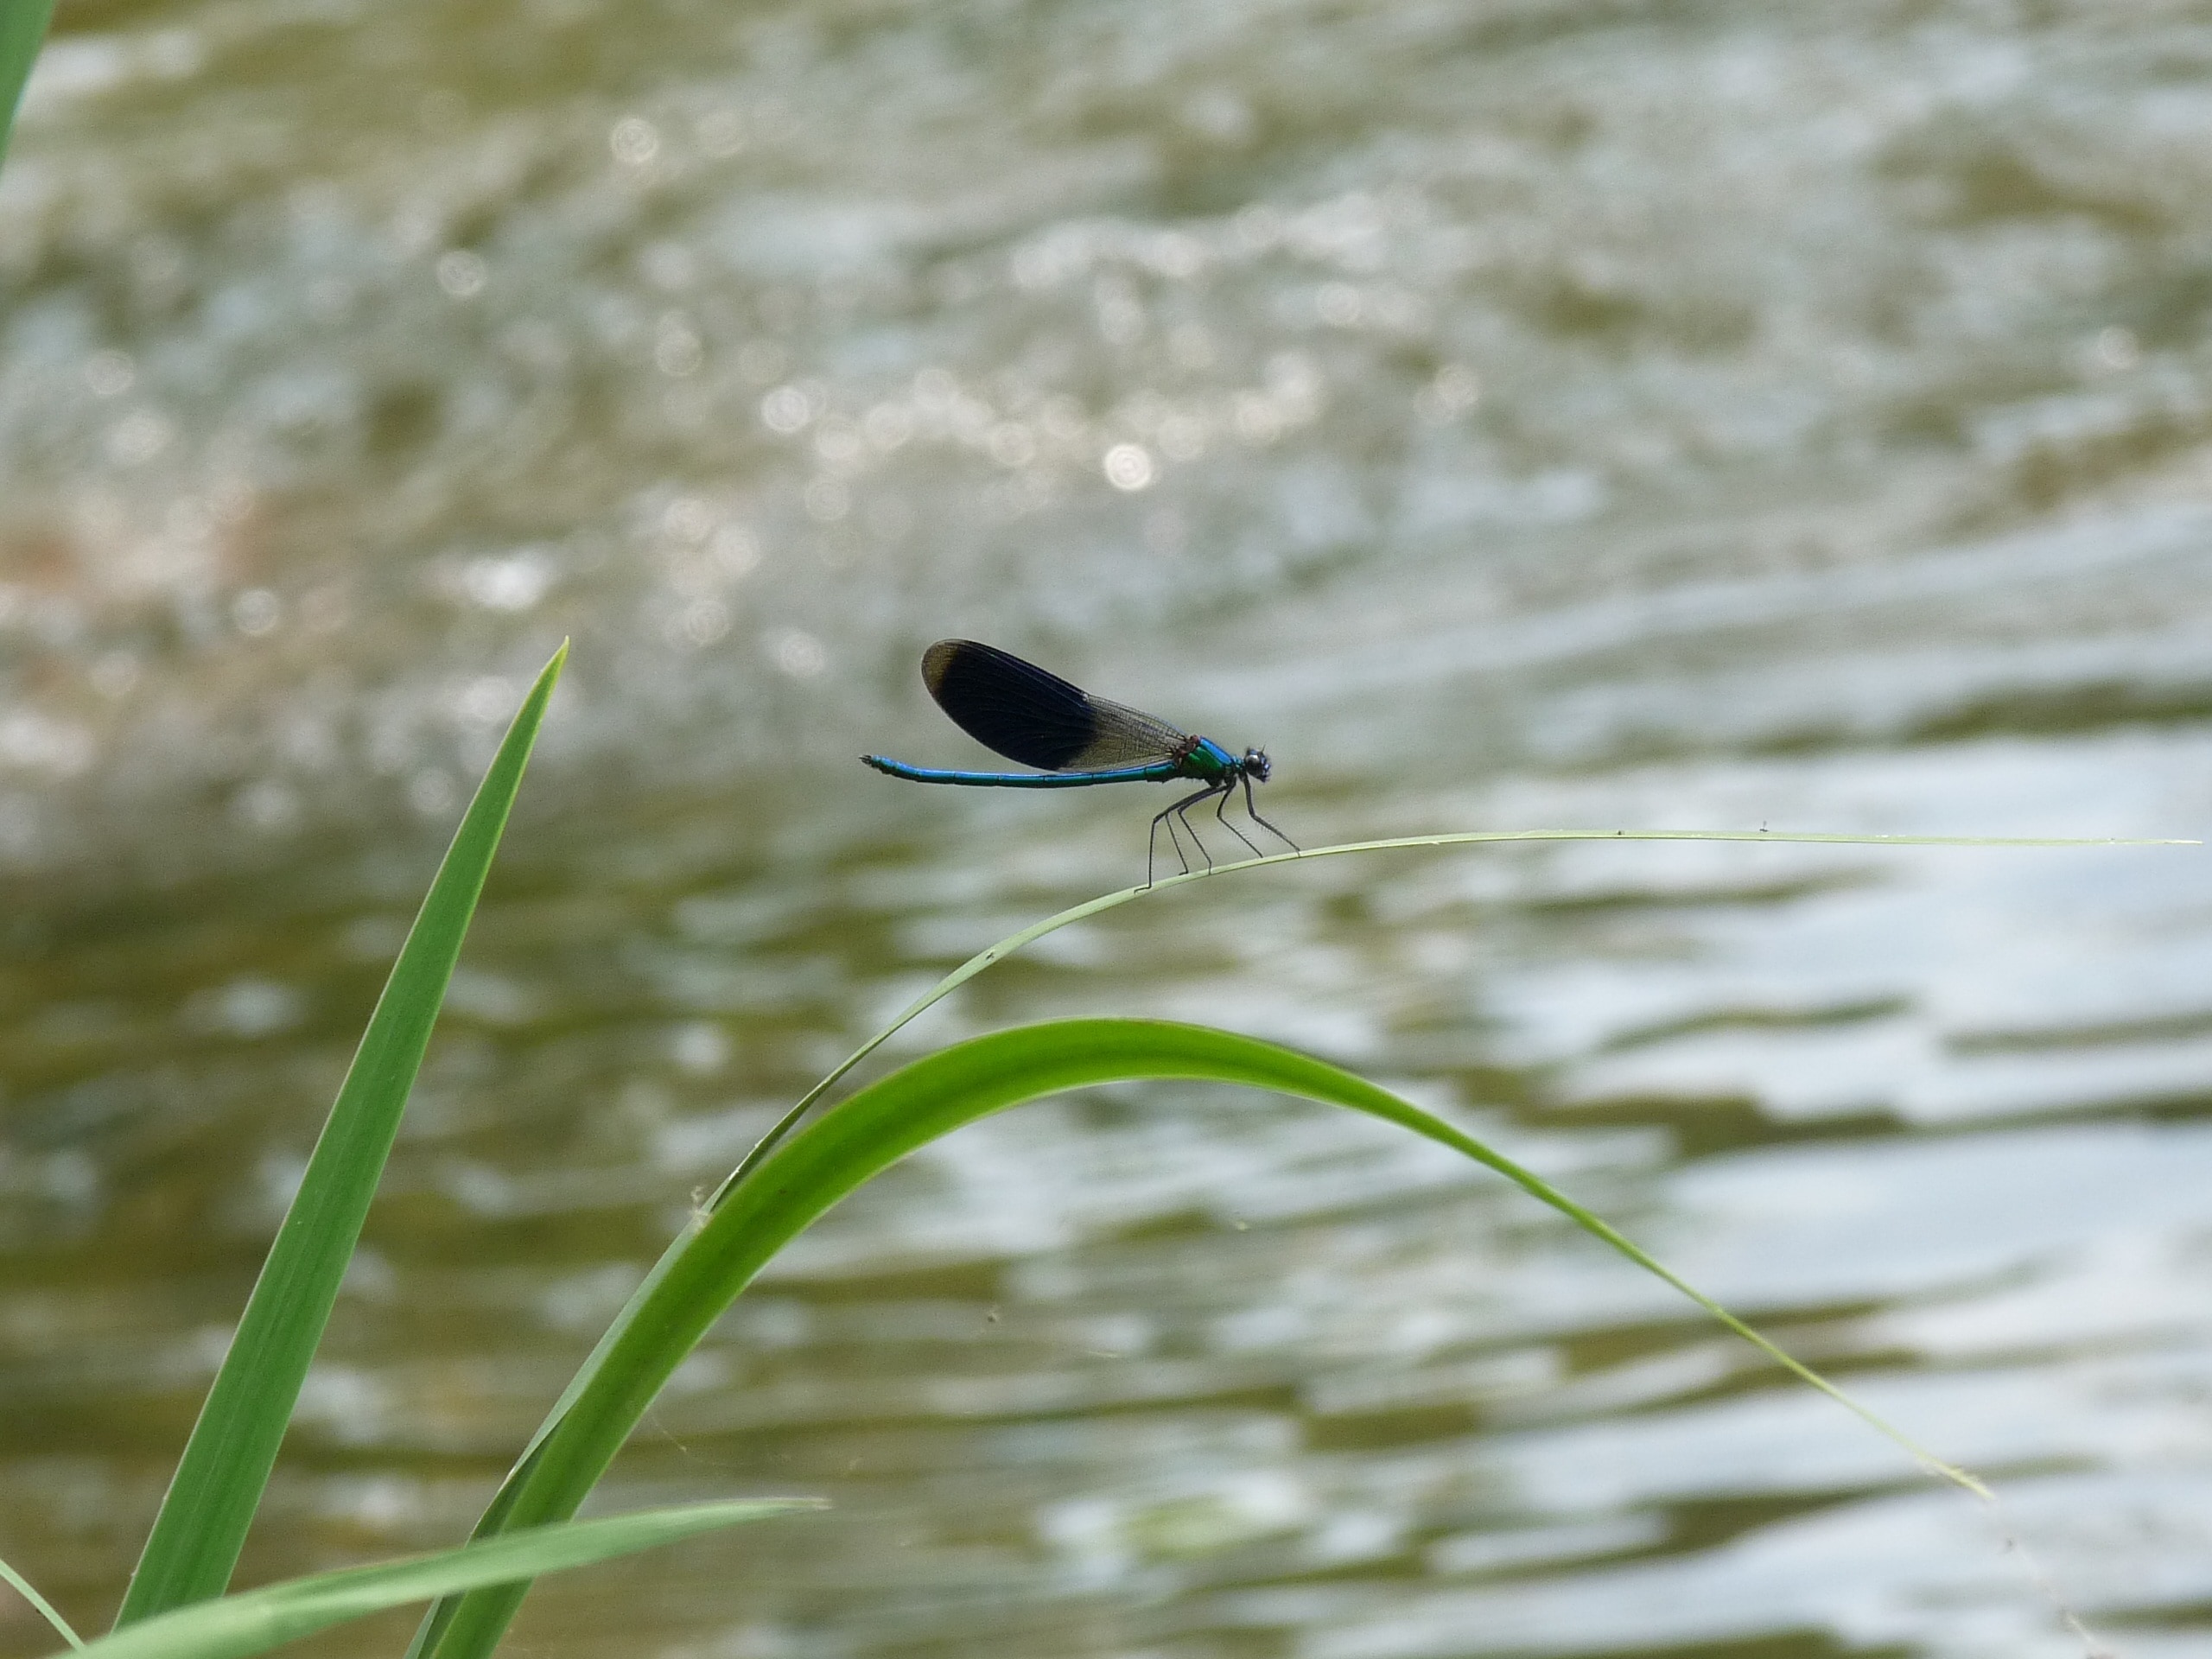 blue gray and black dragonfly